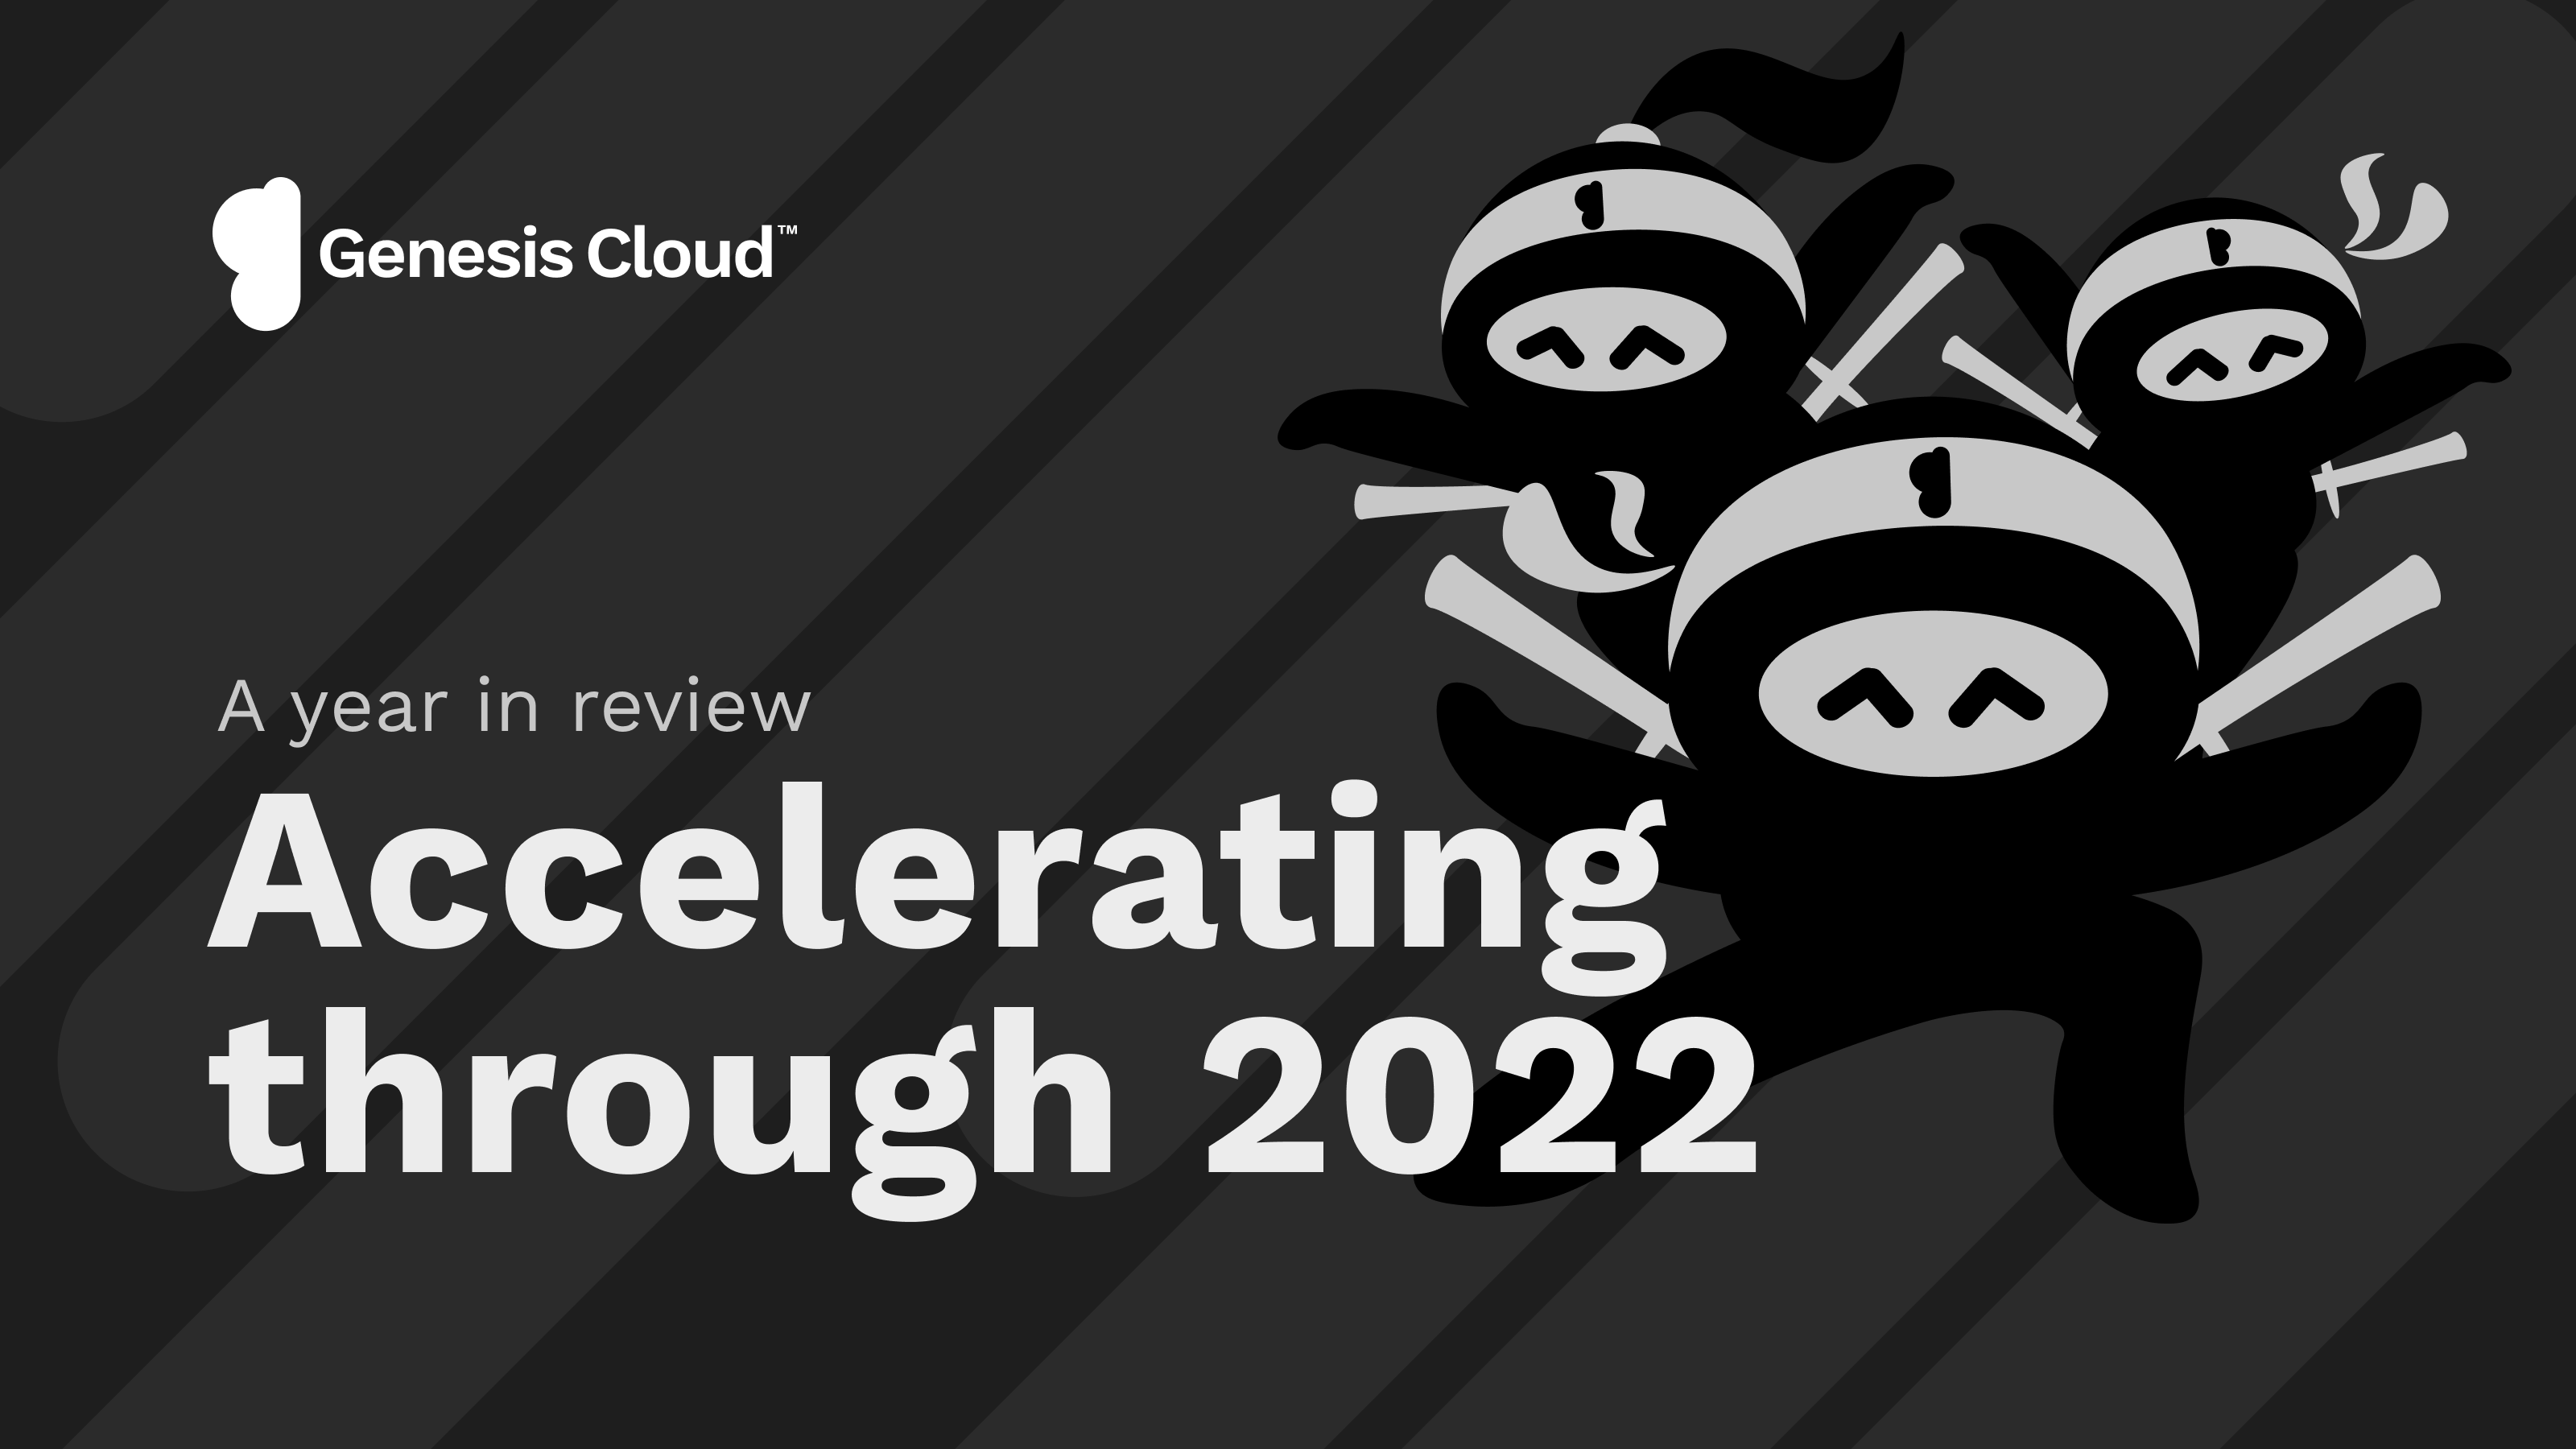 Accelerating through 2022 - A year in review